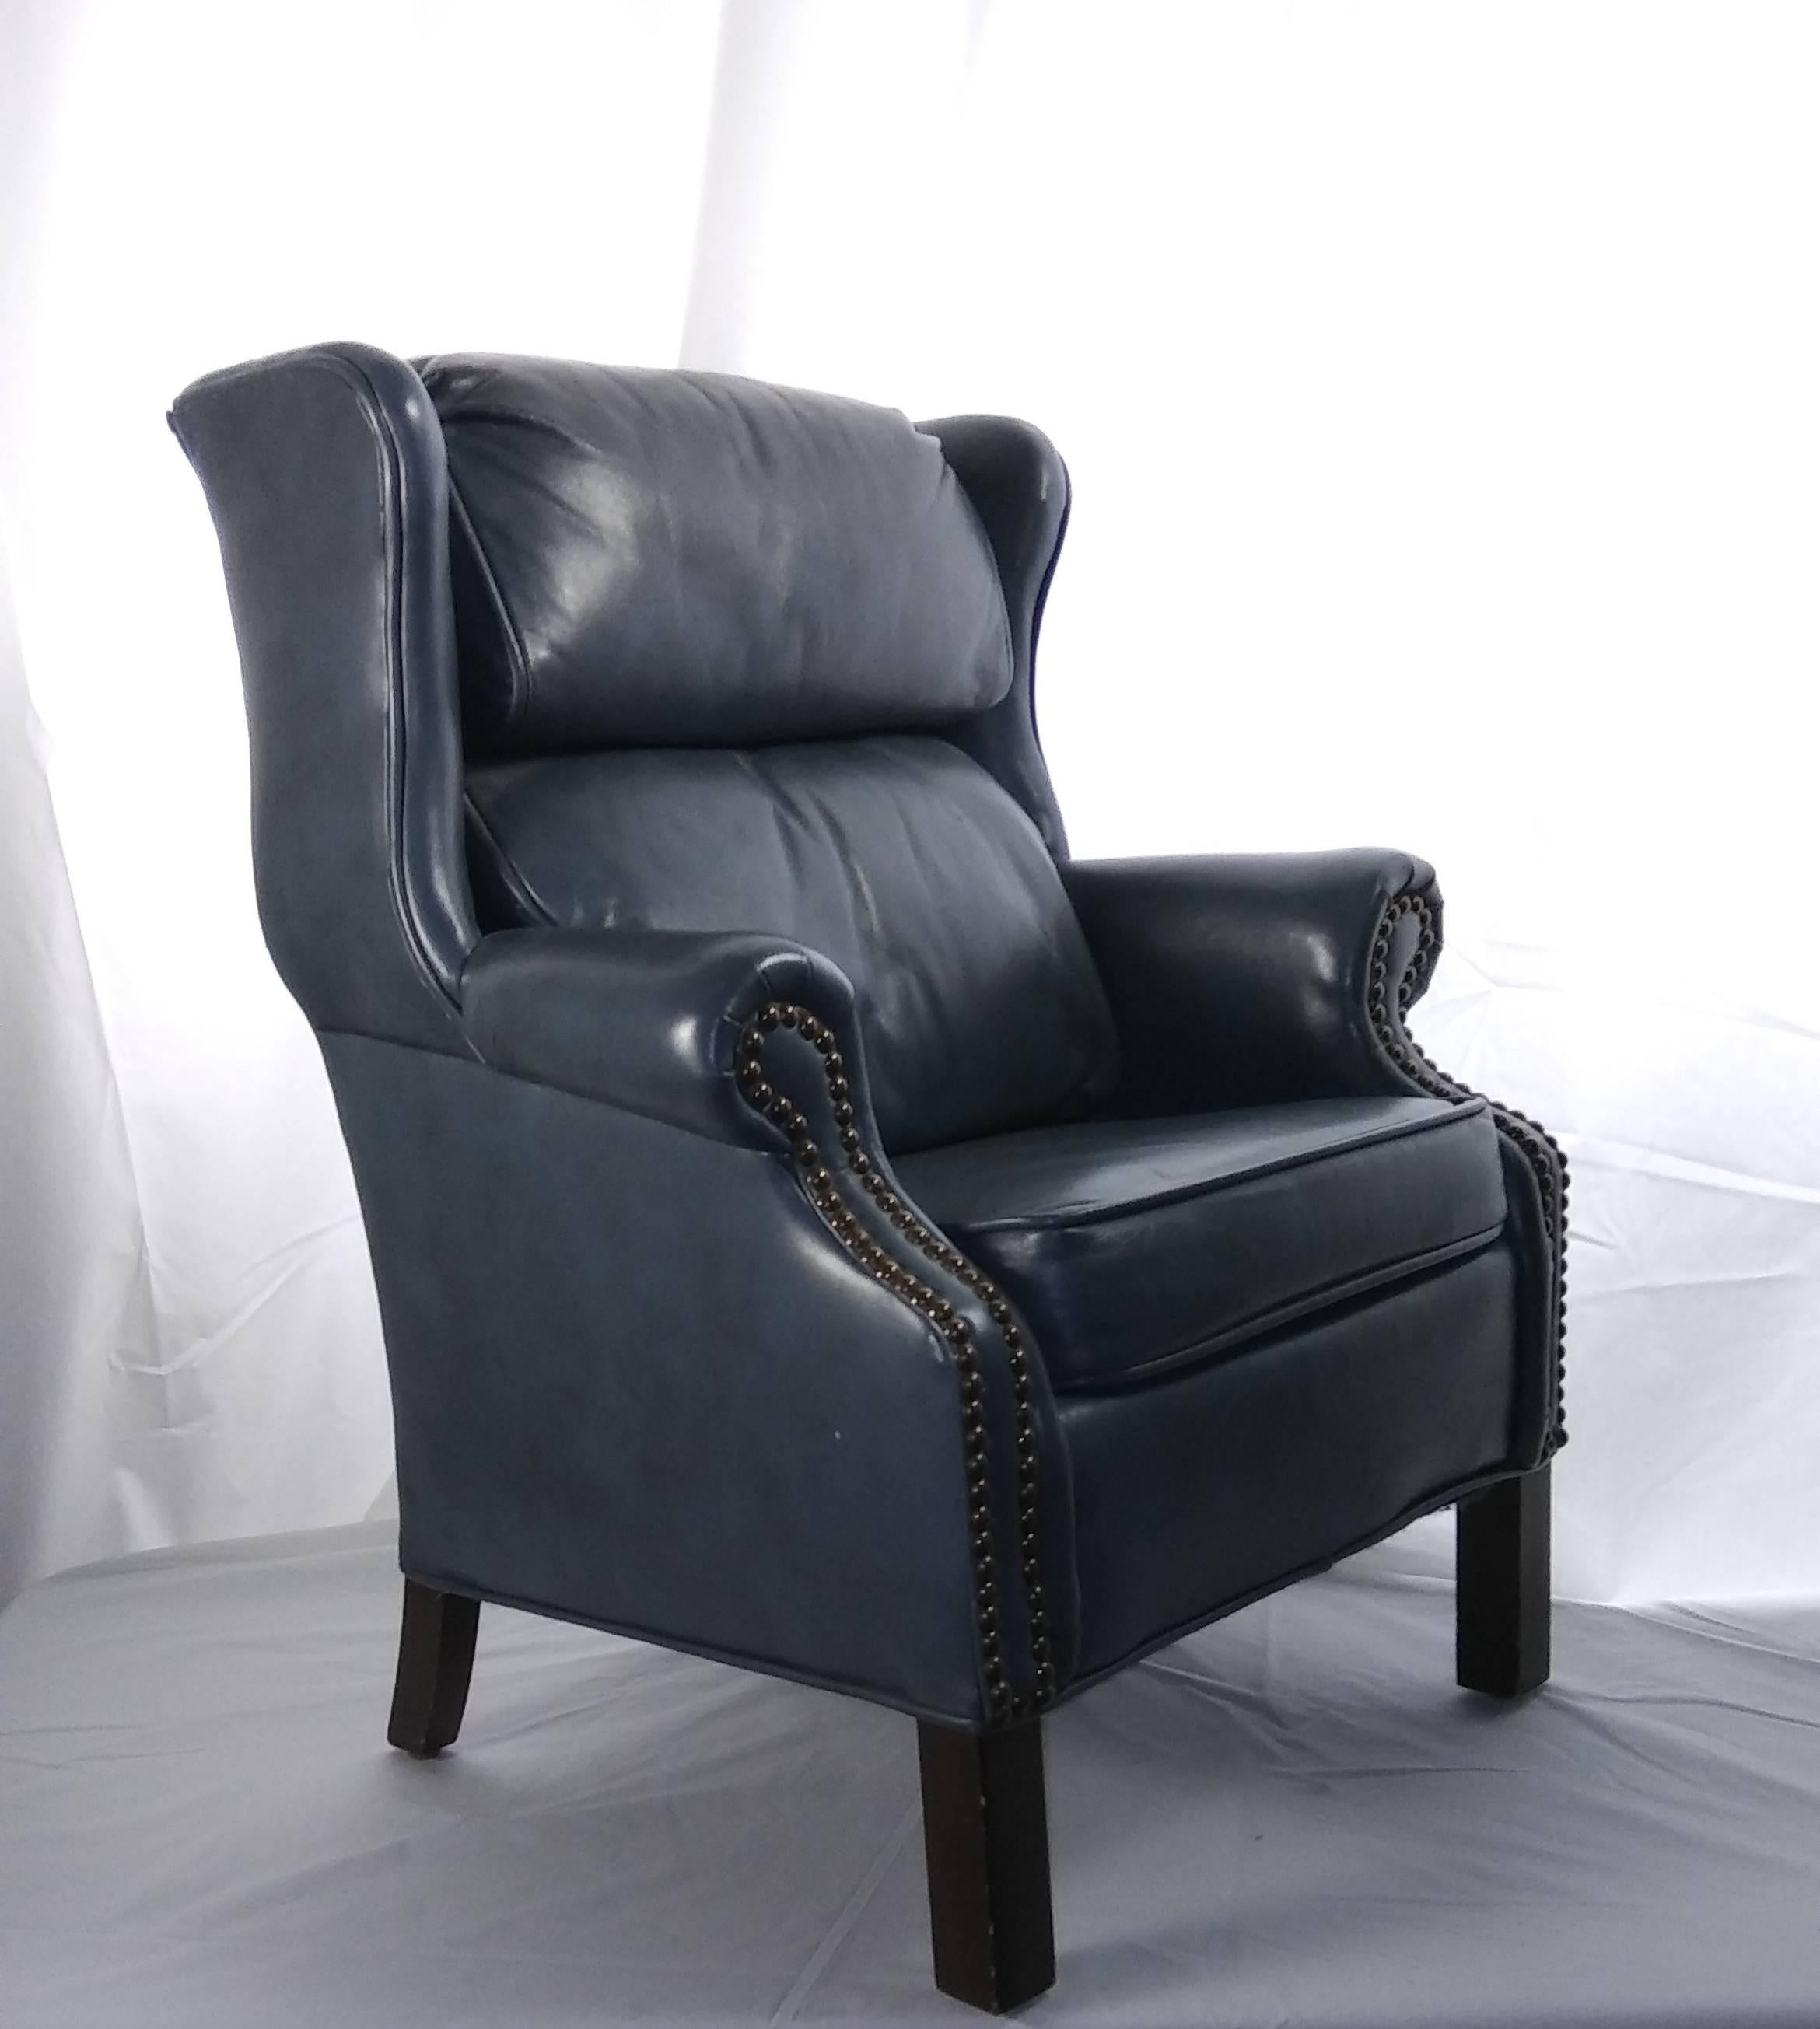 Bradington Young Child's executive blue-gray leather wing back chair, equipped with cushioned headrest and backrest over square seat cushion with piping trim; double nail-head trim to the set-back rolled arms, and raised on mahogany legs.
Perfect